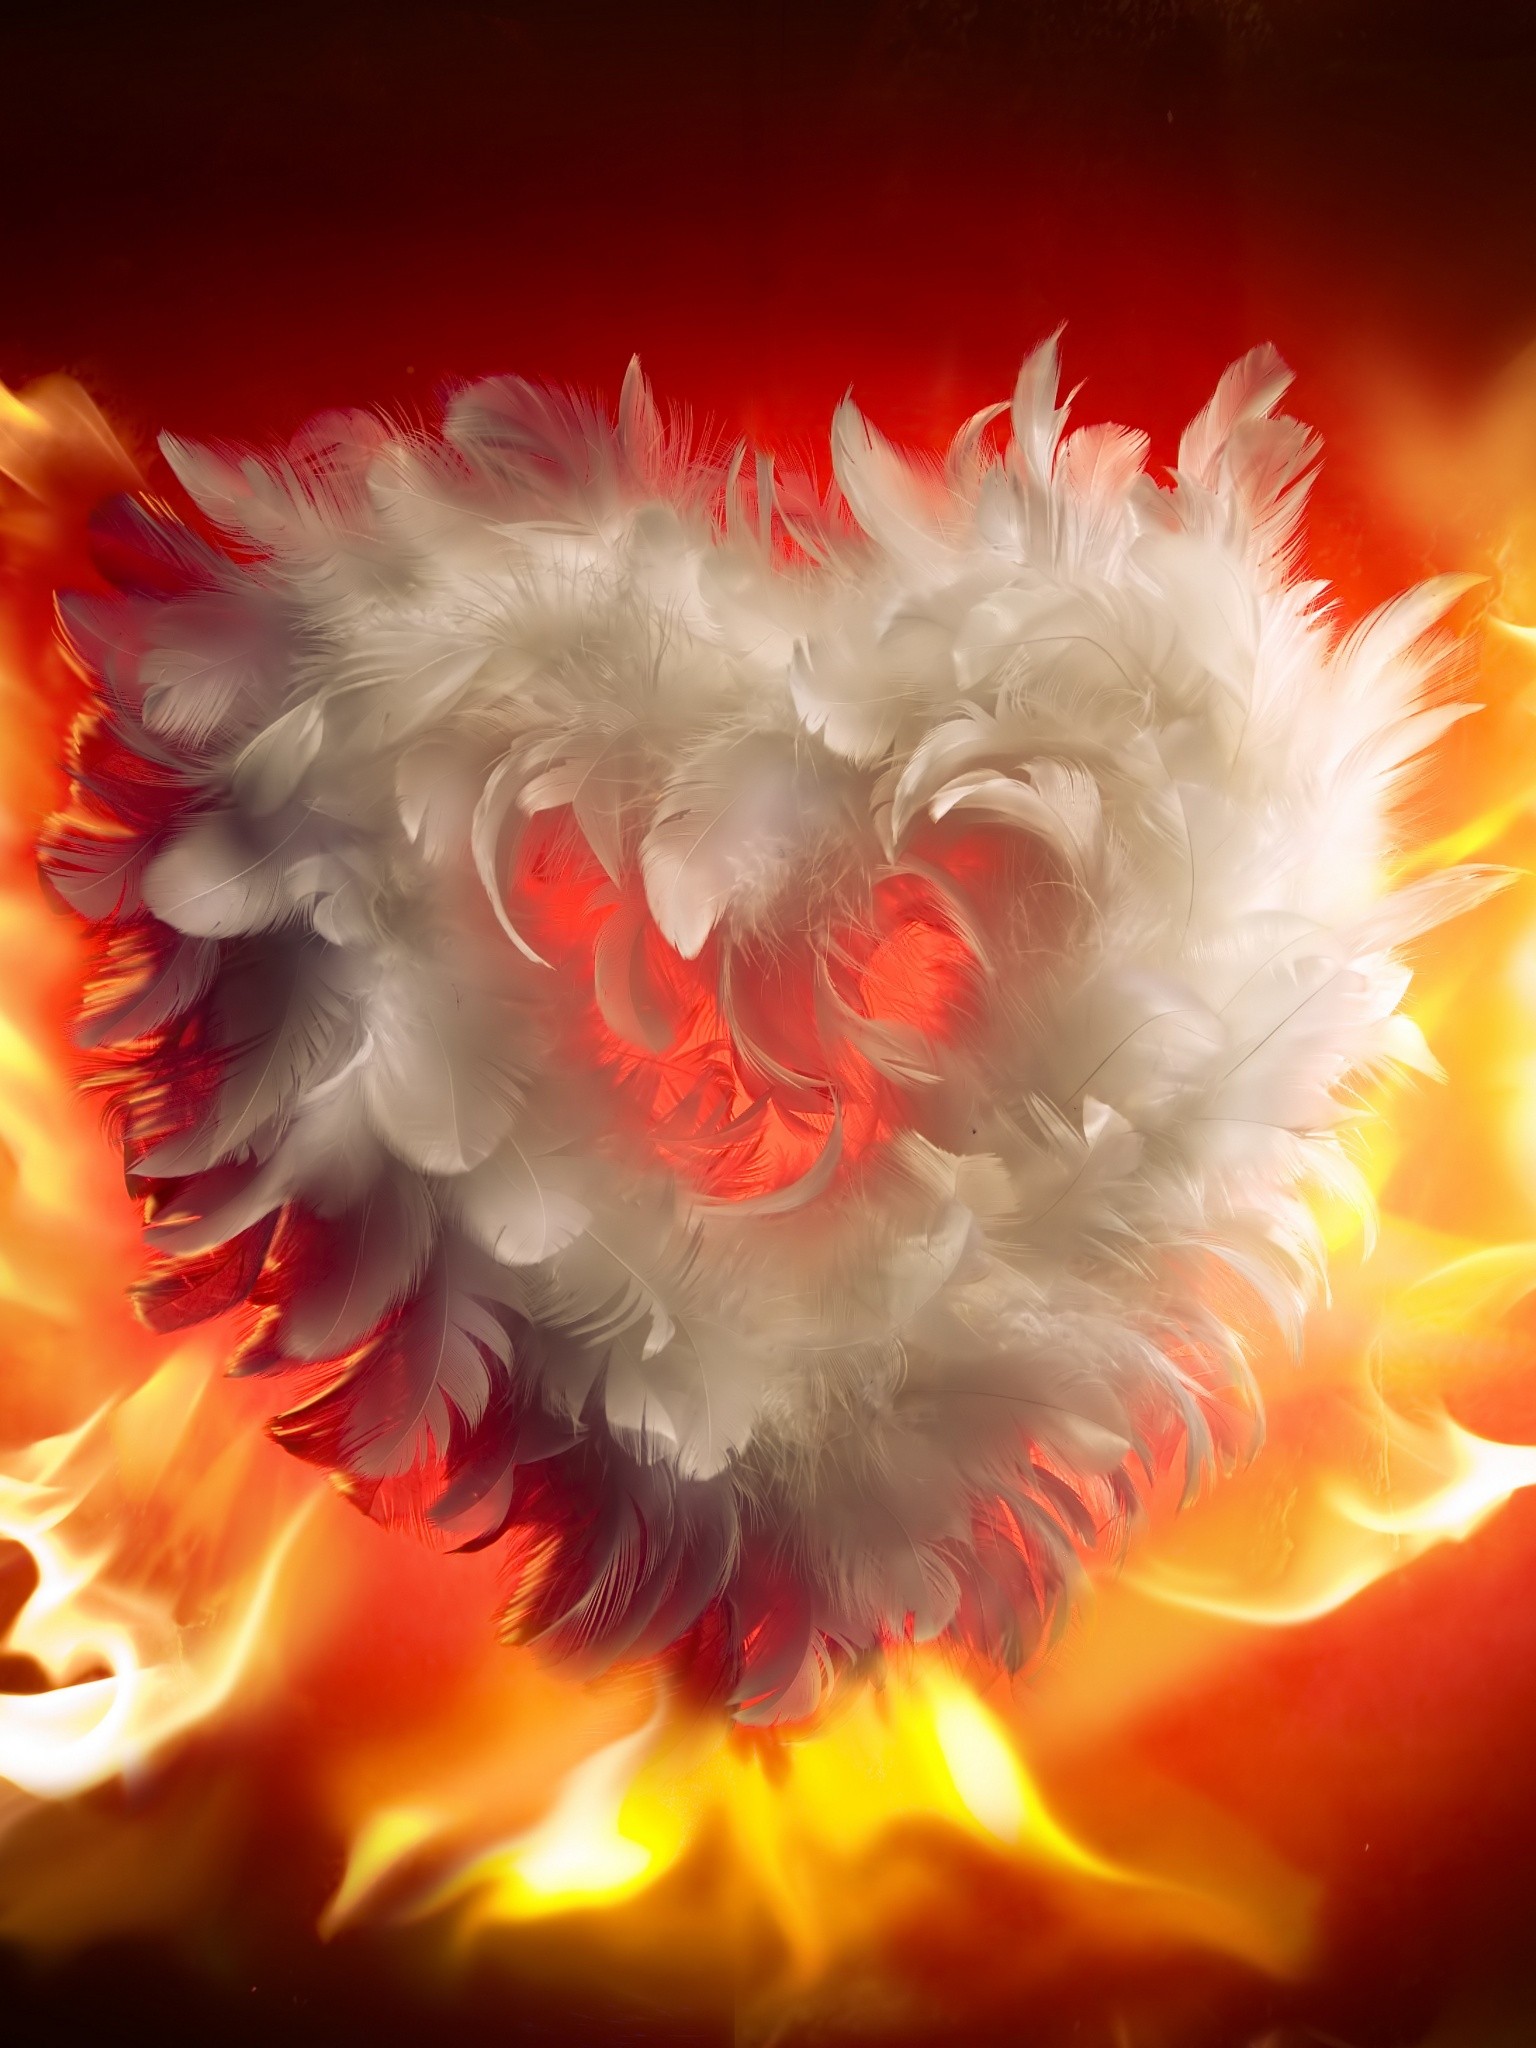 Heart On Fire Images - Free Download on Freepik